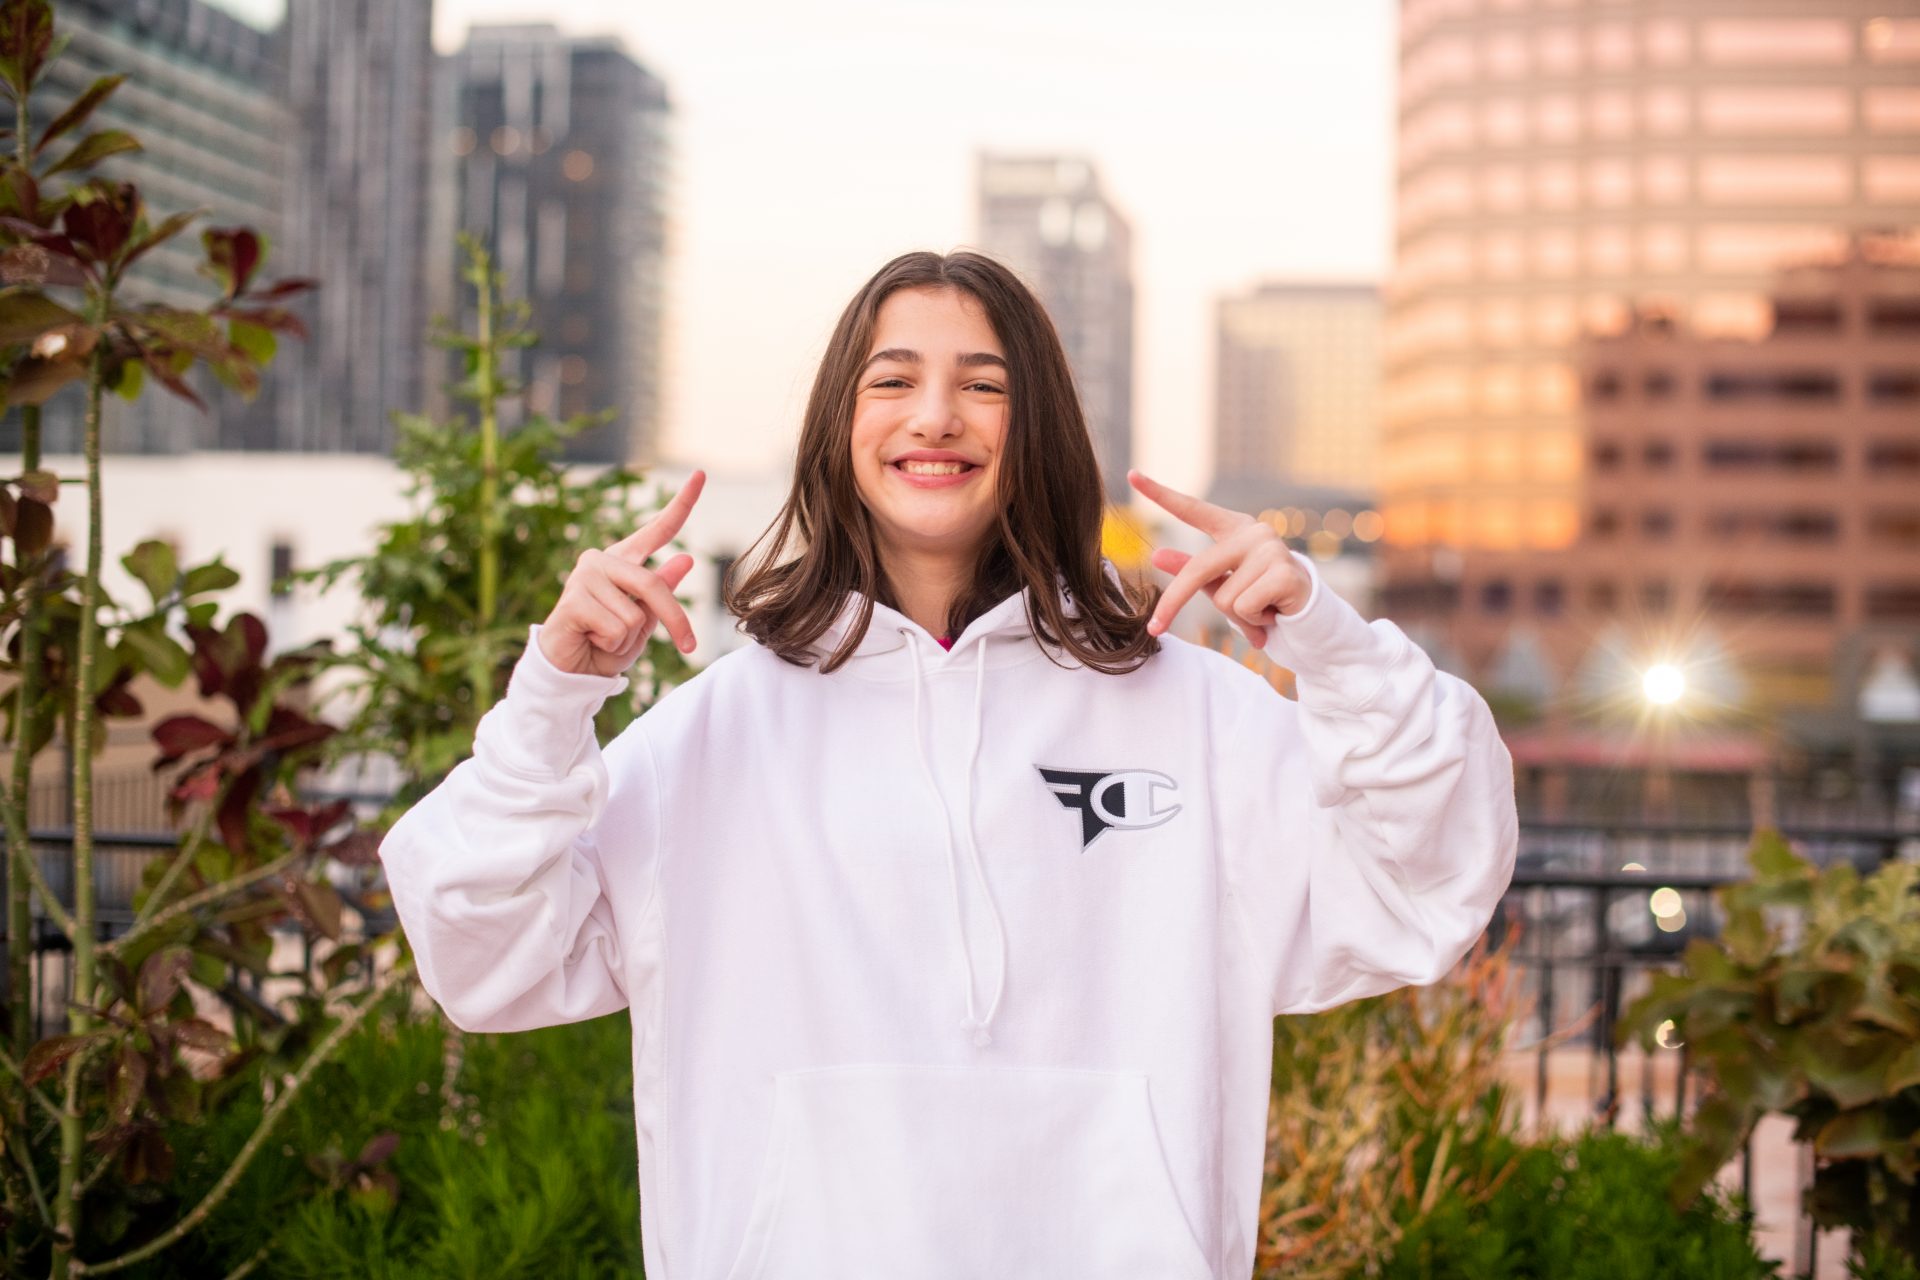 What the excessive engagement numbers of FaZe, XSET, and PokiMane repeat us about female influencers